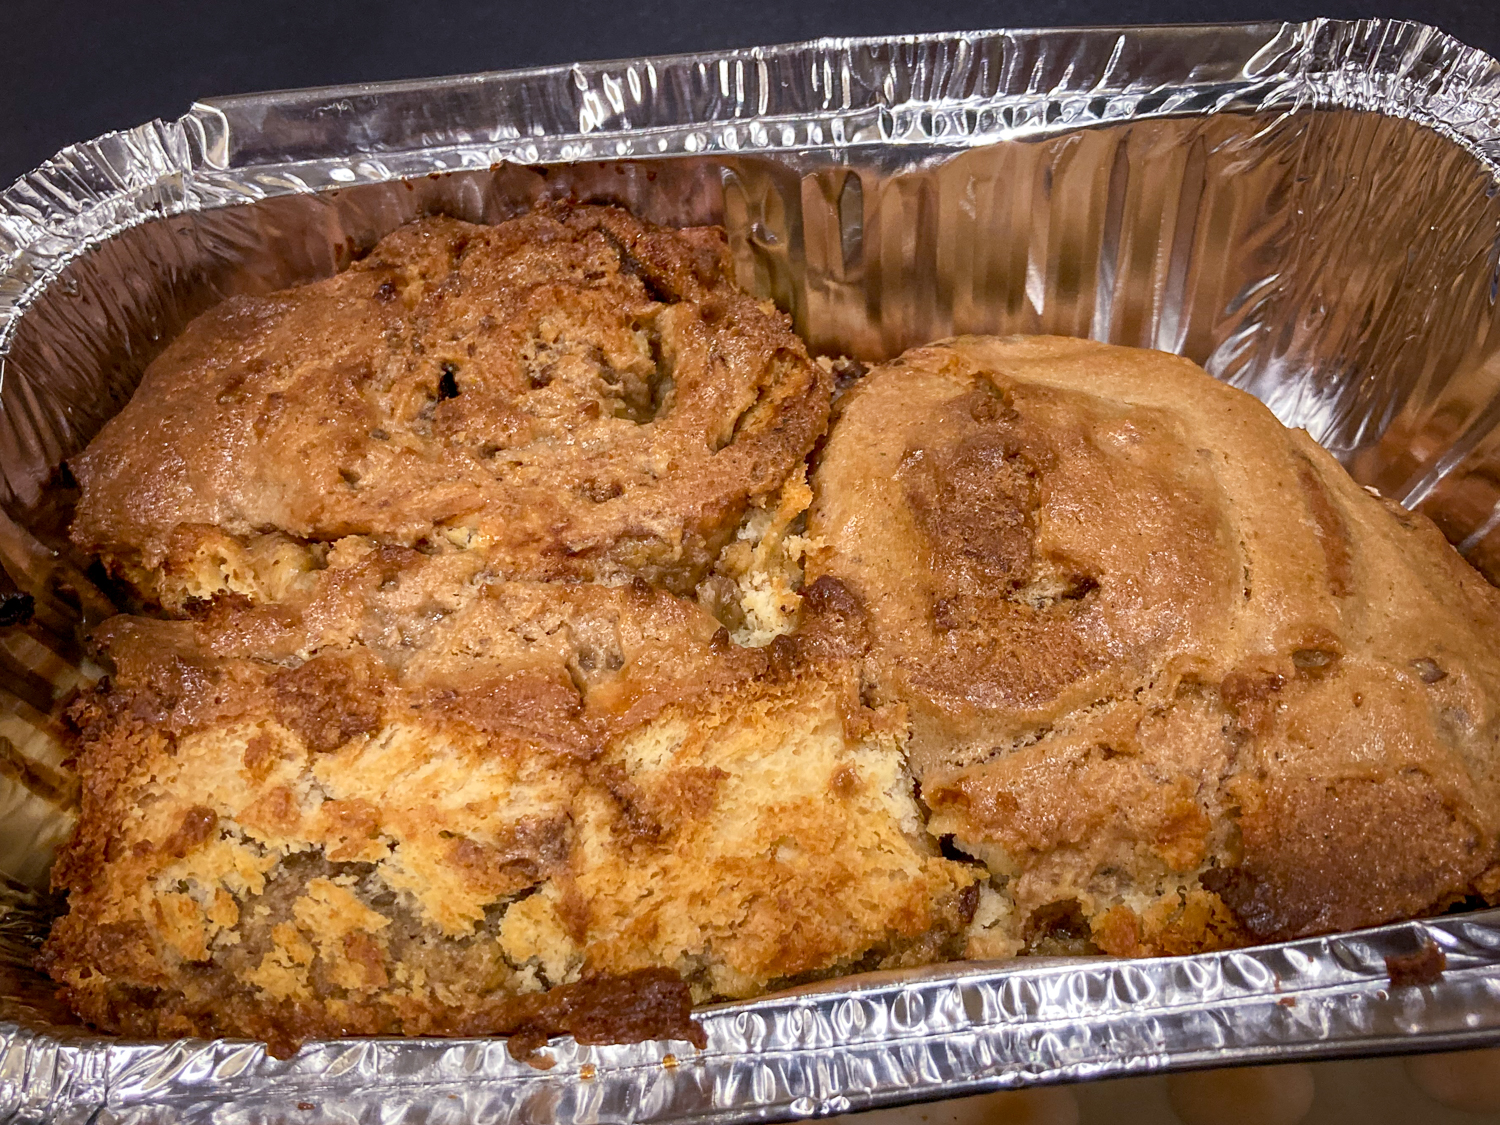 A foil container containing some baked goods